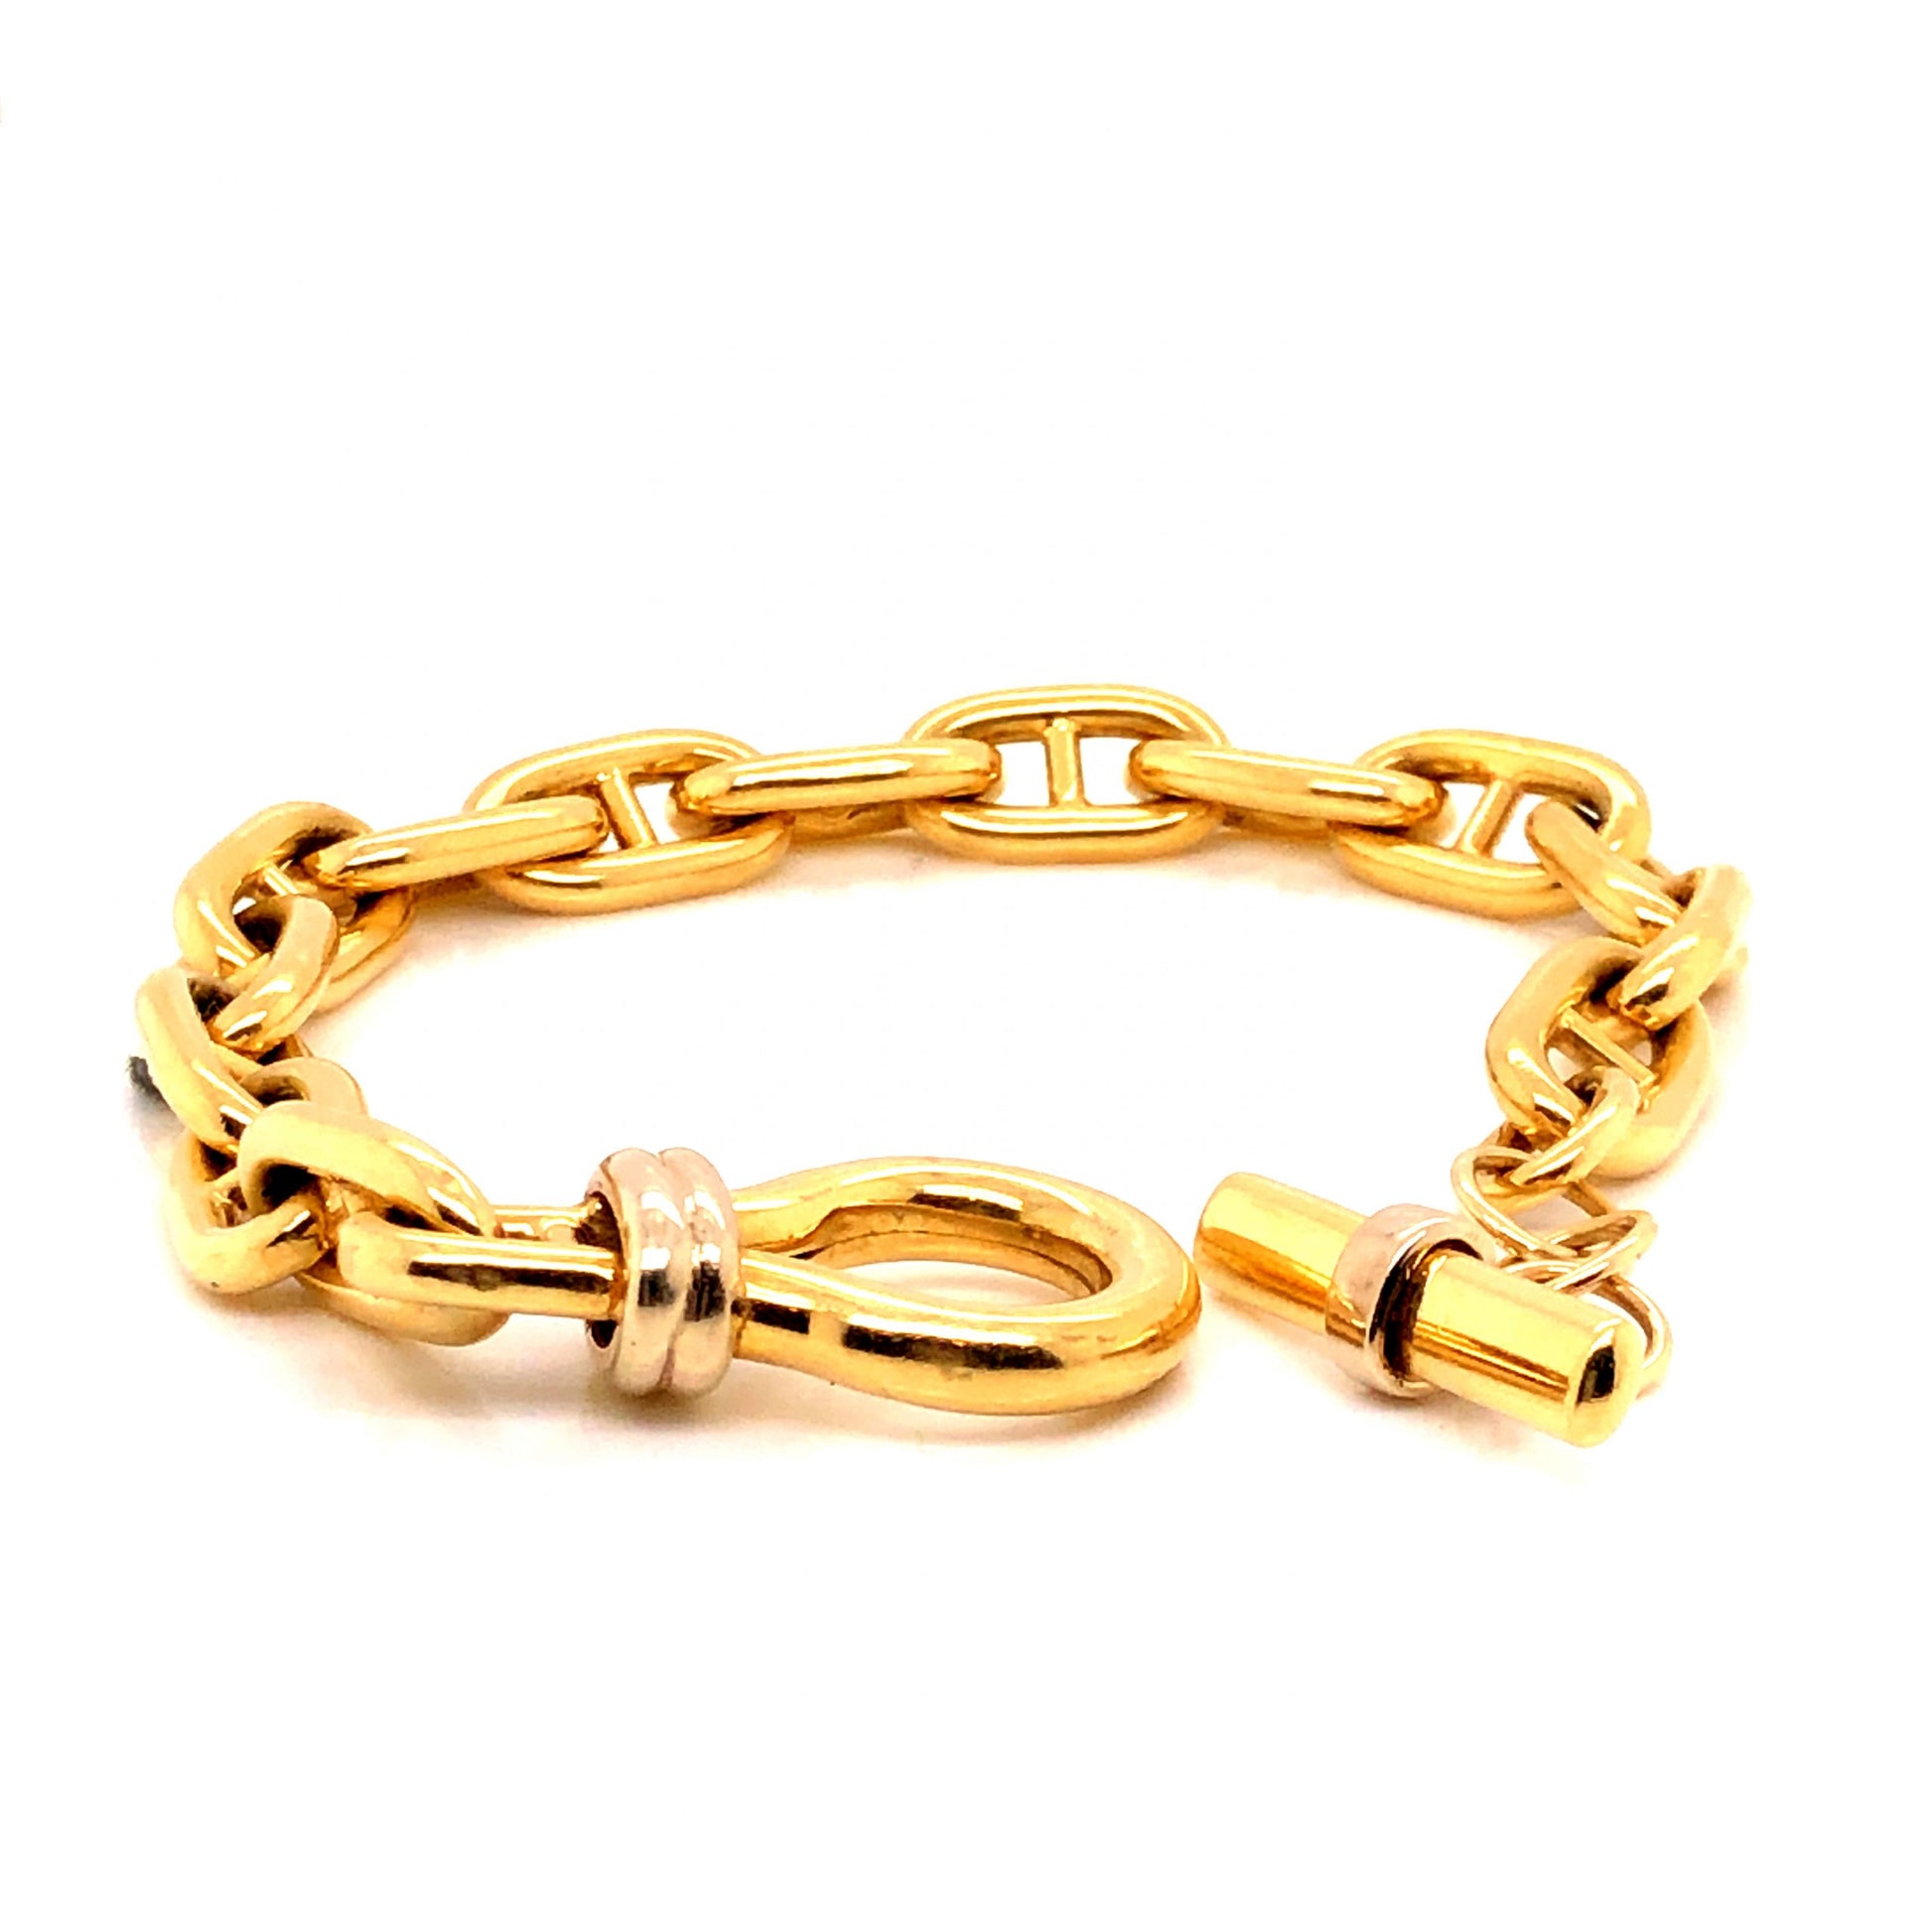 Wide Link Toggle Bracelet in 18k Yellow Gold